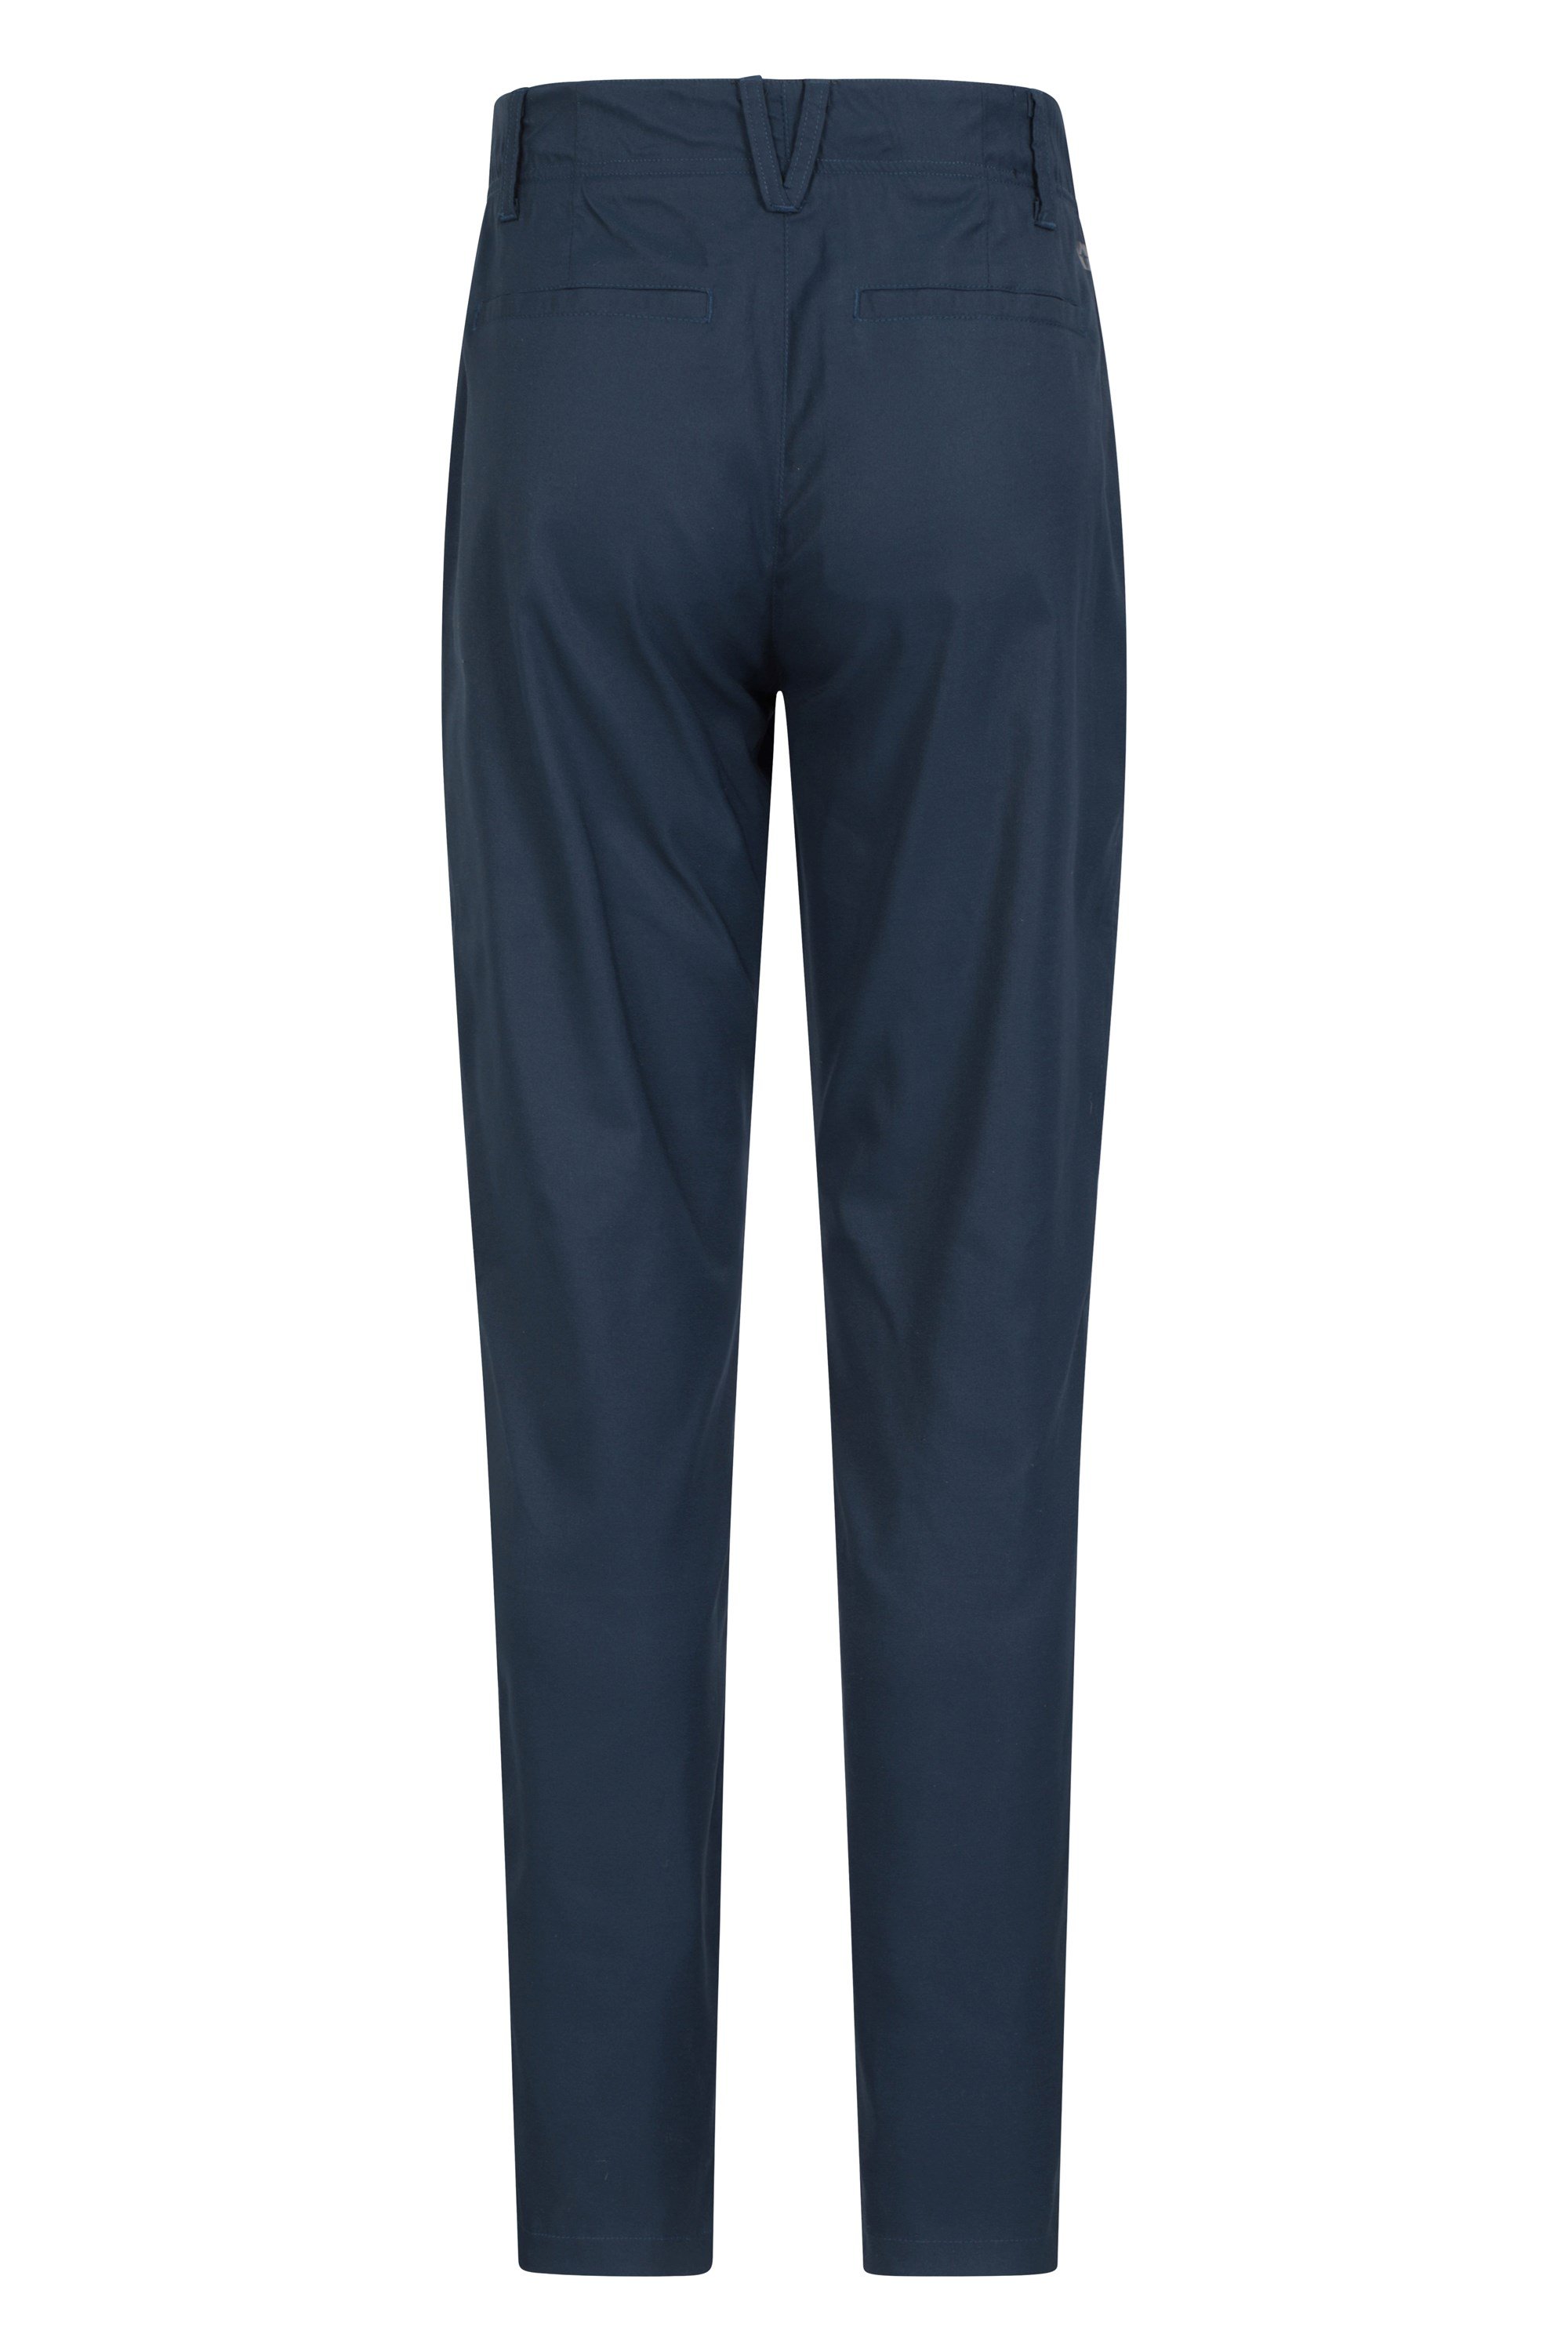 Eagle Tailored Womens Golf Trousers